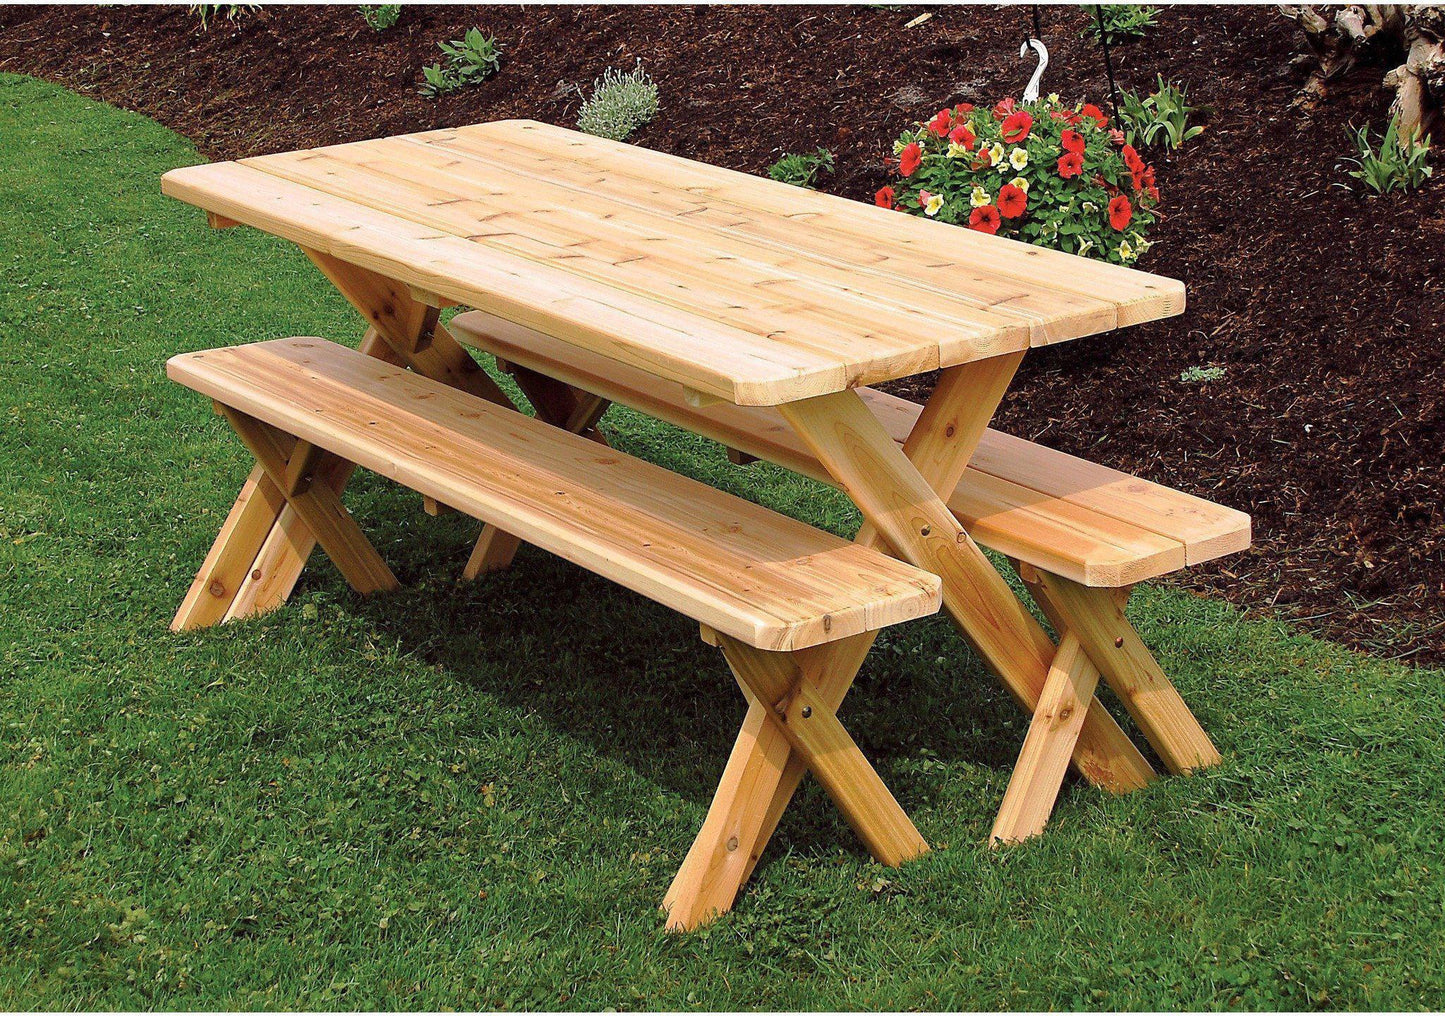 A & L FURNITURE CO. Western Red Cedar 4' Cross-leg Table w/2 Benches - Specify for FREE 2" Umbrella Hole  - Ships FREE in 5-7 Business days - Rocking Furniture